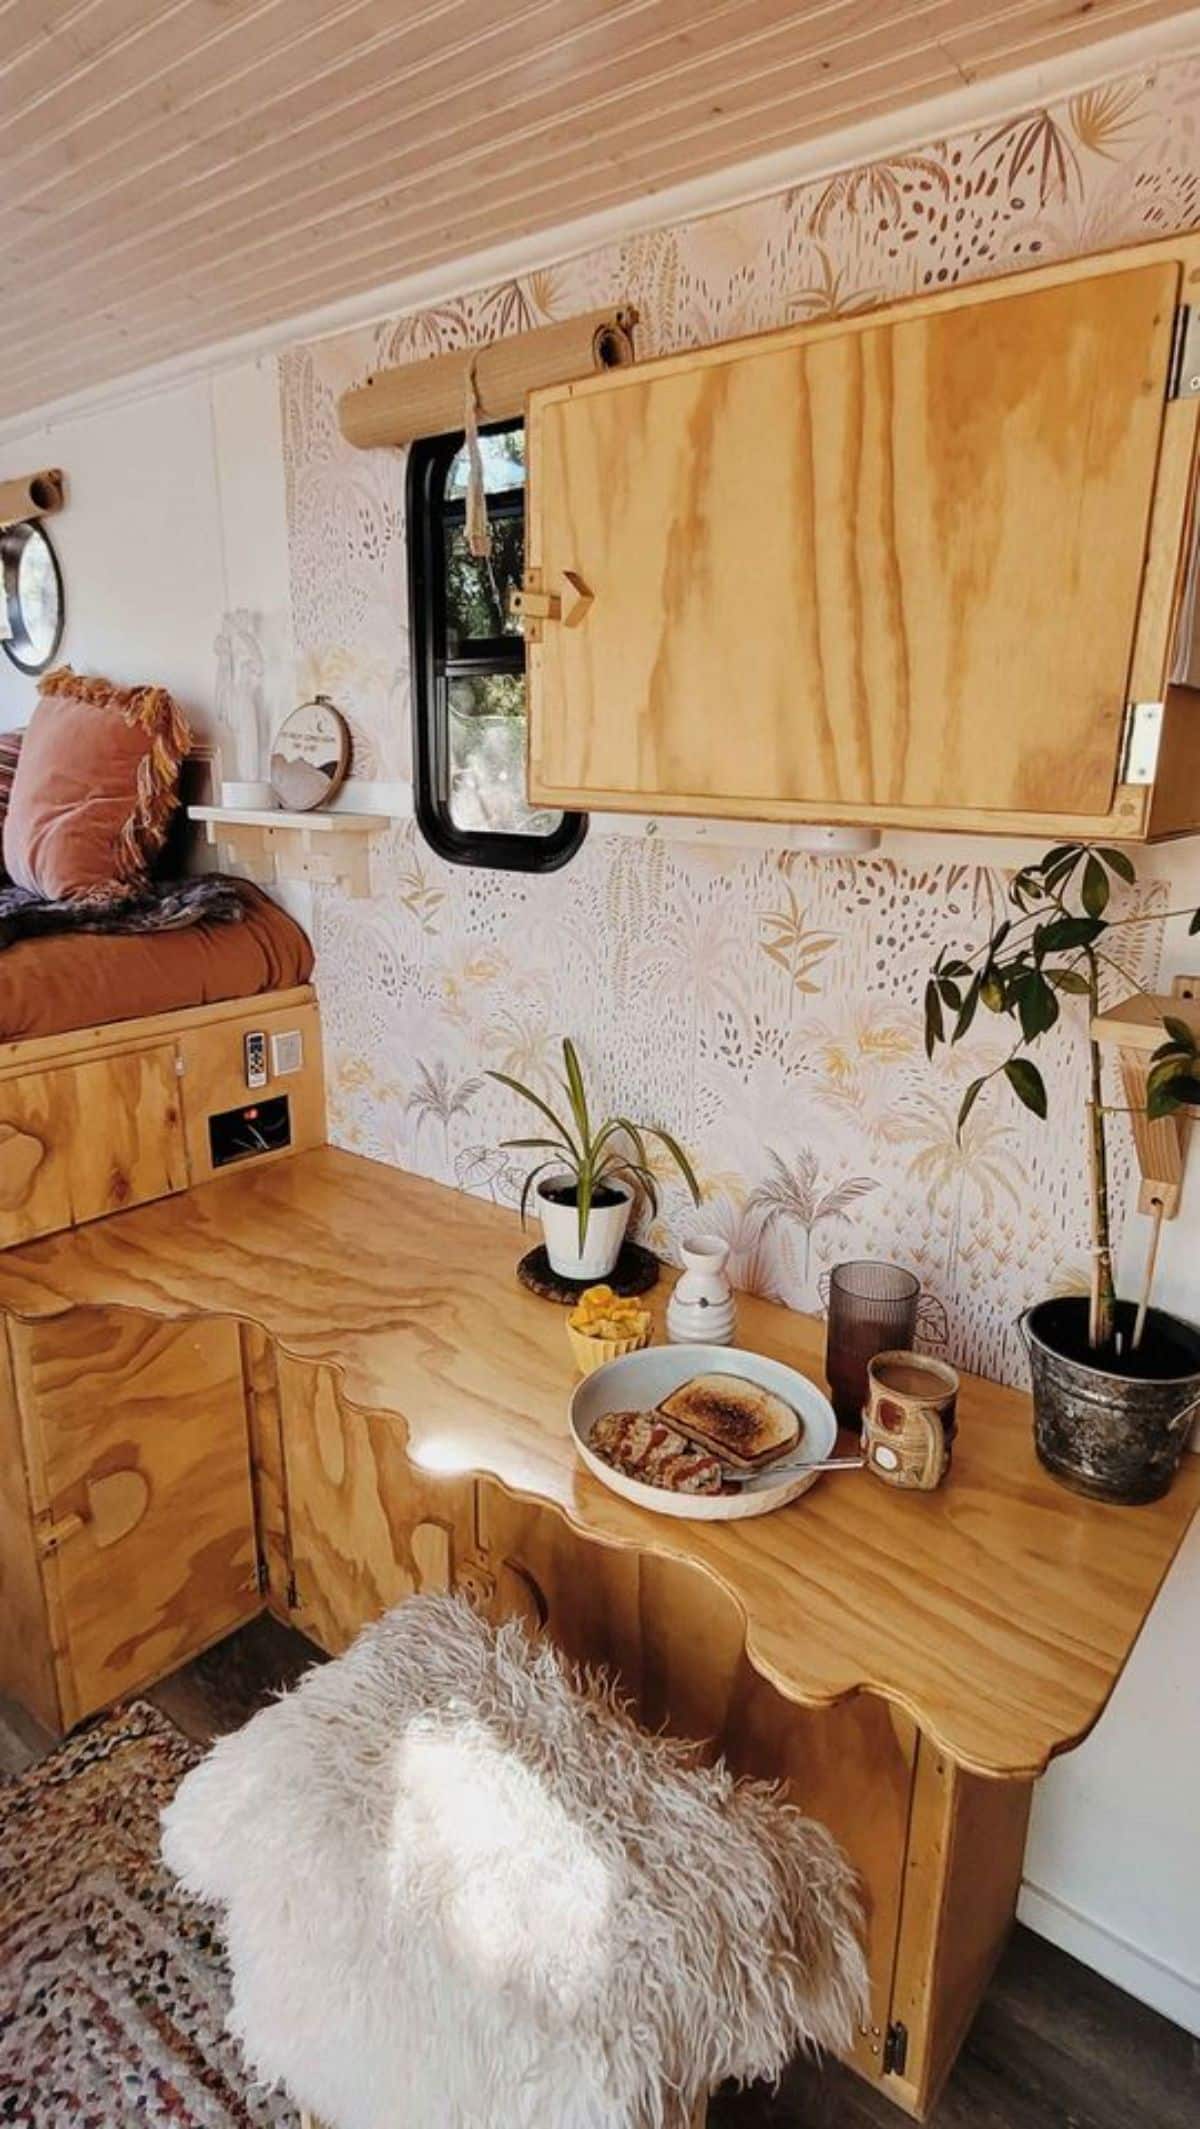 Custom wood work in interiors of 14’ Tiny Camper makes it more stylish